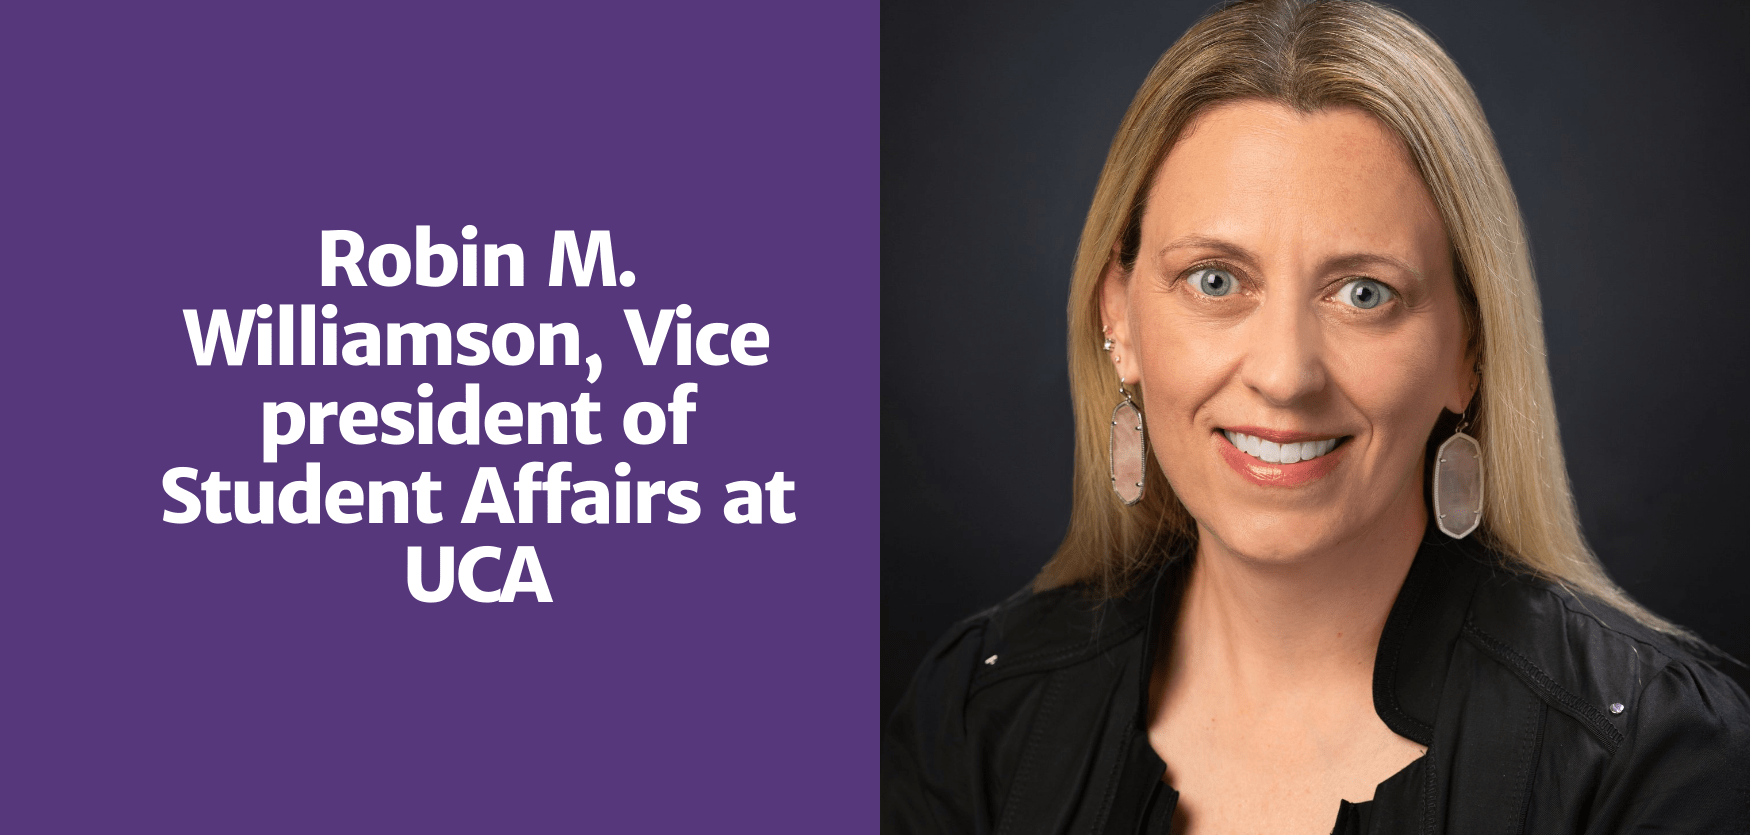 Featured Image: Robin M. Williamson, Vice president of Student Affairs at UCA